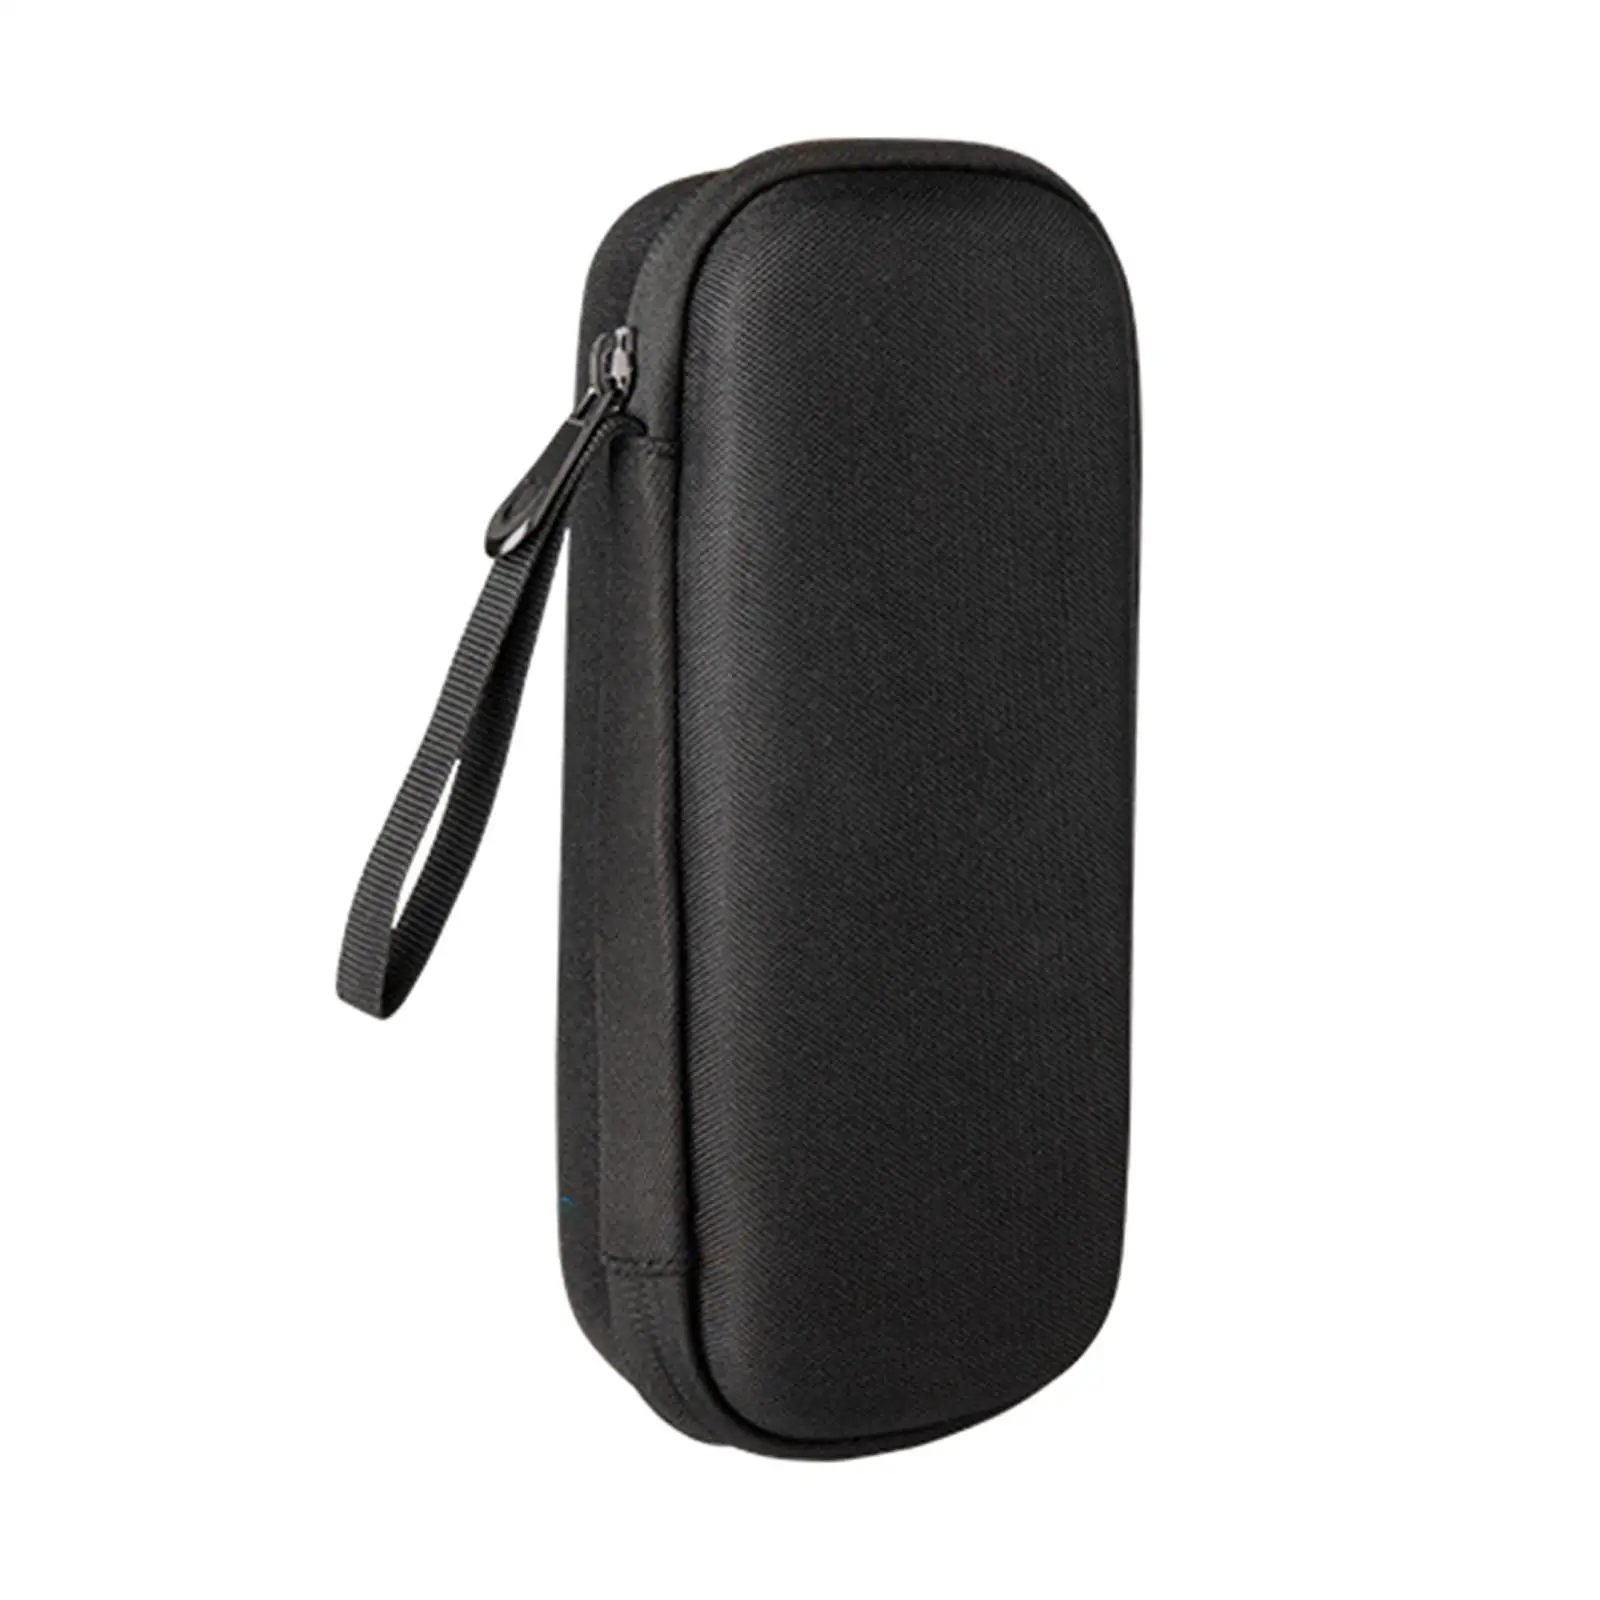 Hard Travel EVA Case Travel Protective Bag Charger Carrying Case Storage Pouch for Cable Earphone Electronic Accessories